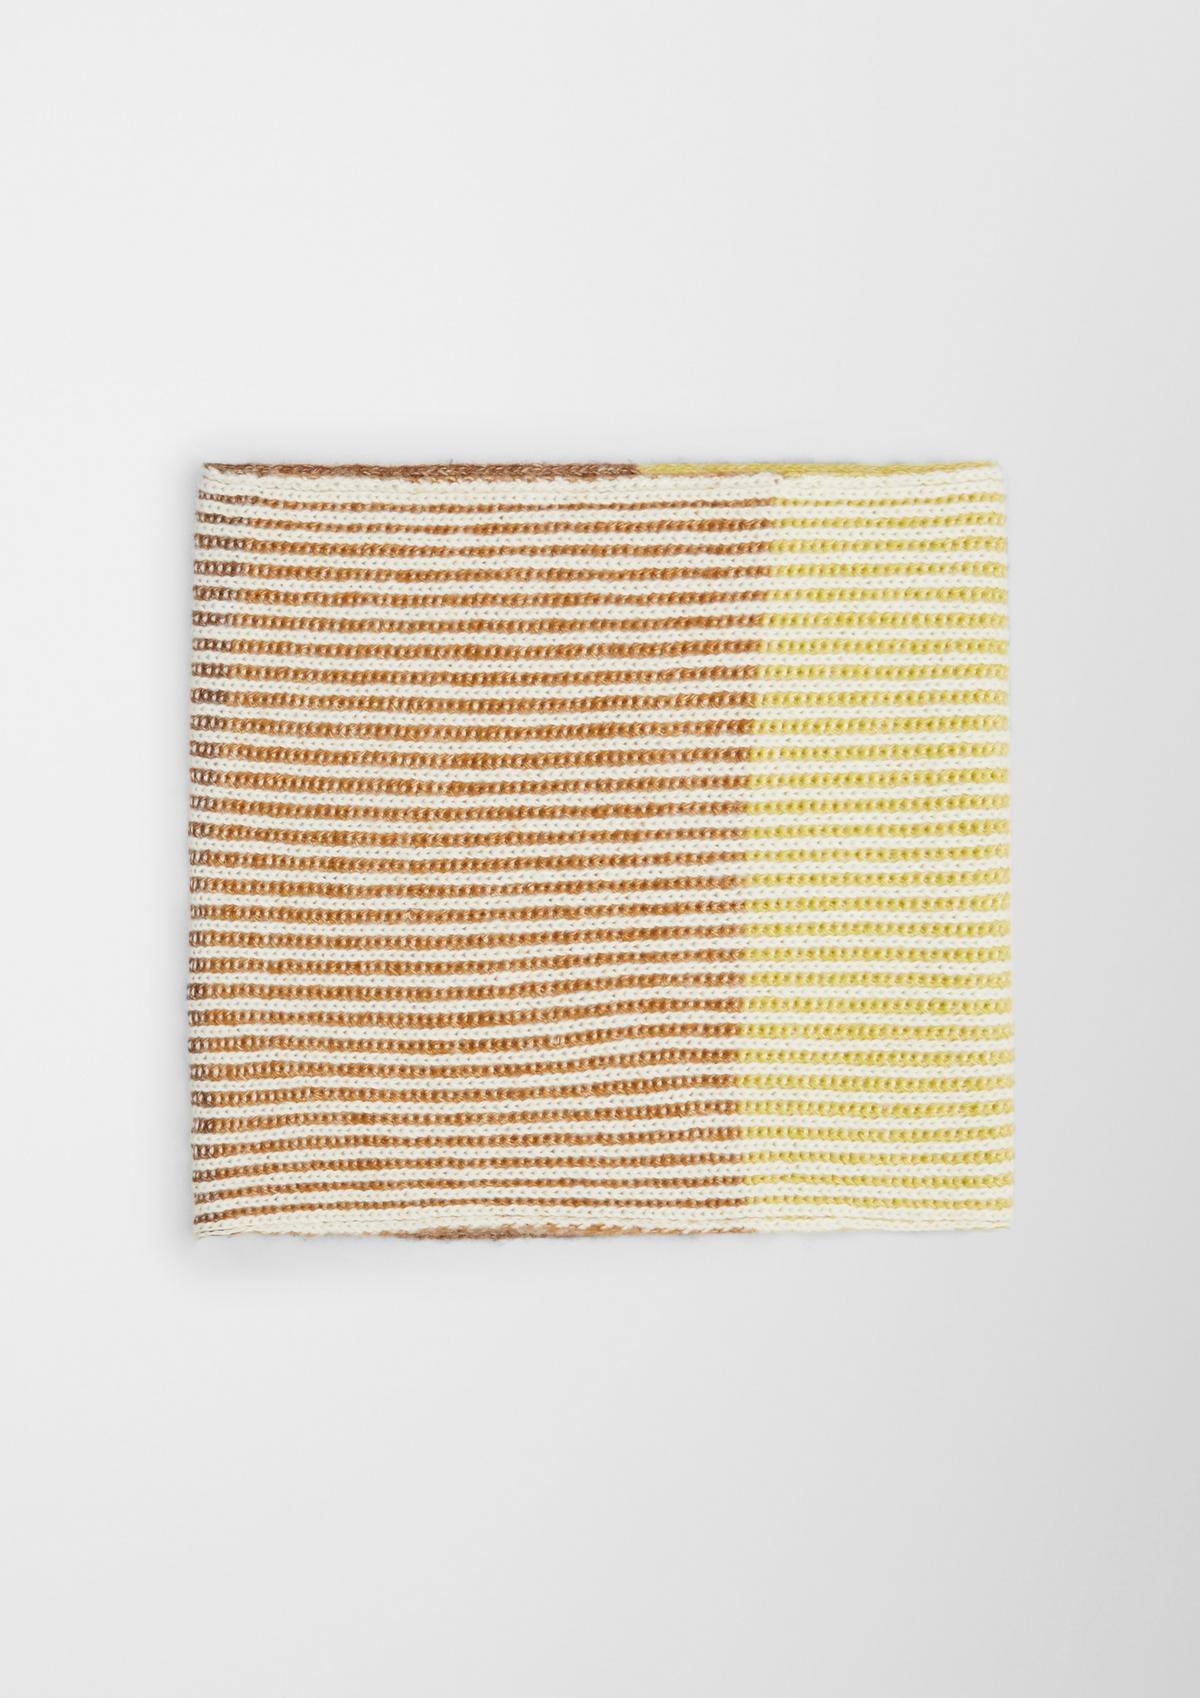 s.Oliver Loop scarf made of cotton with wool